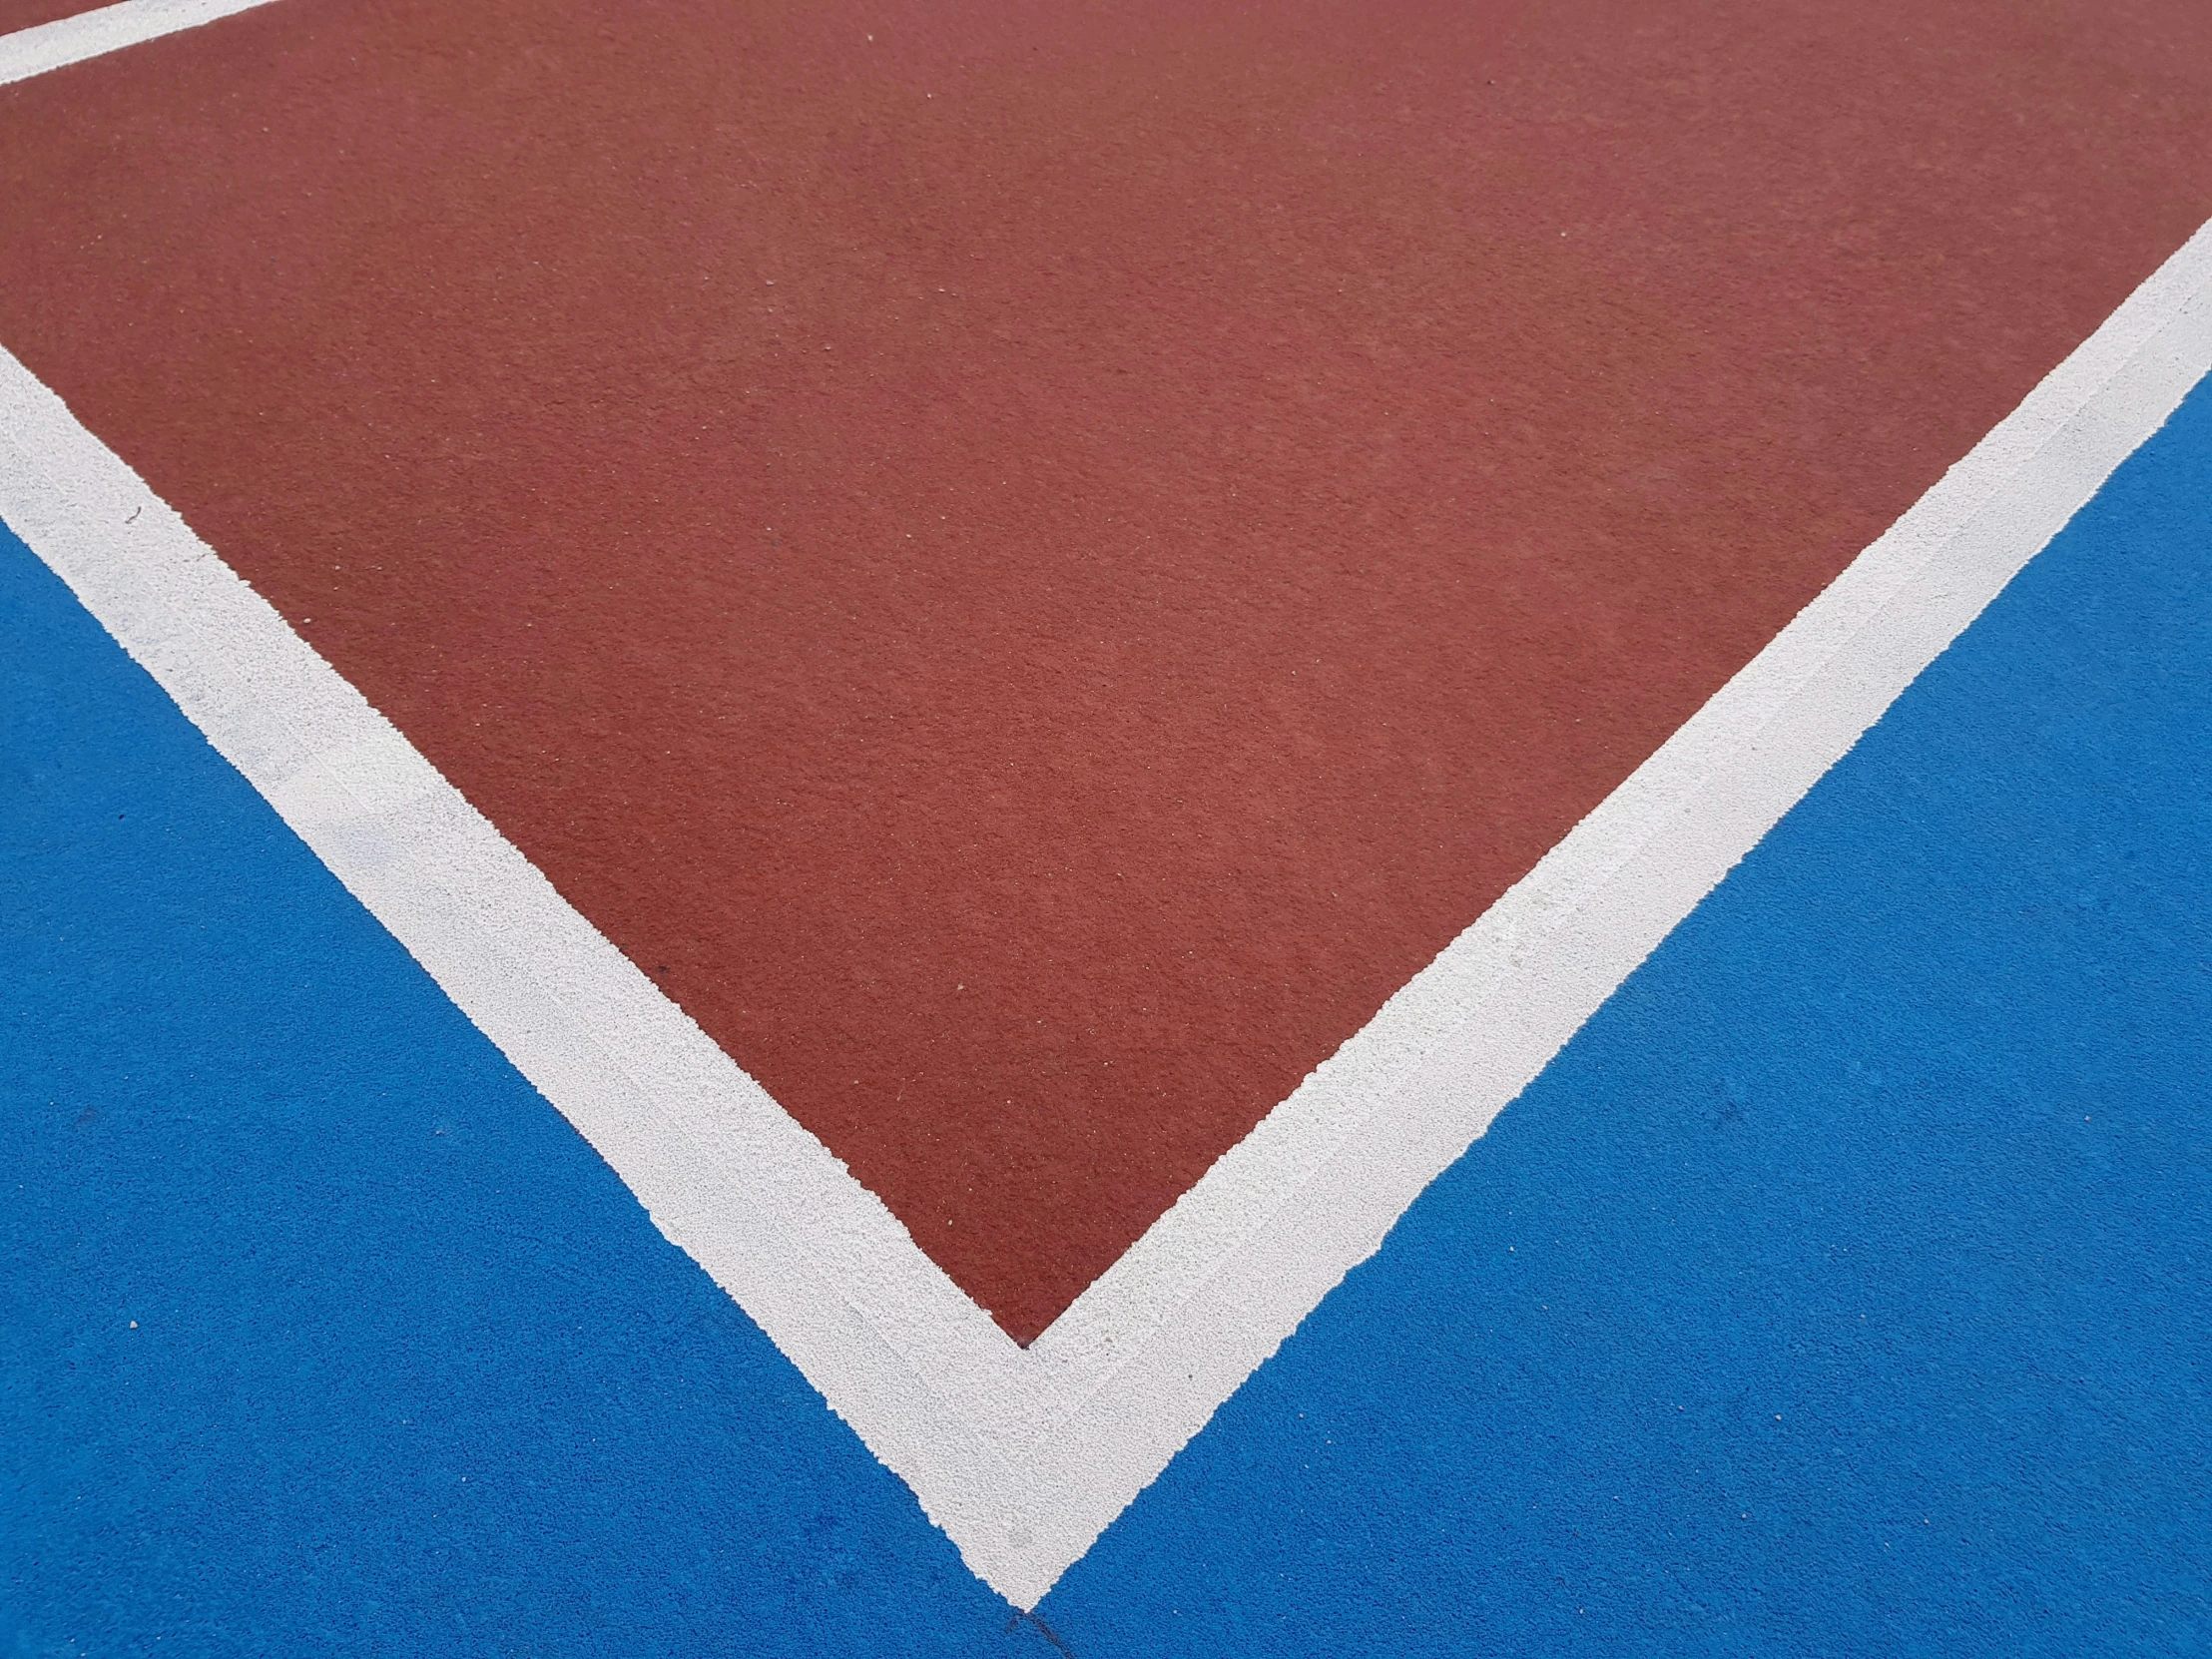 a tennis court with a small bird on the ground